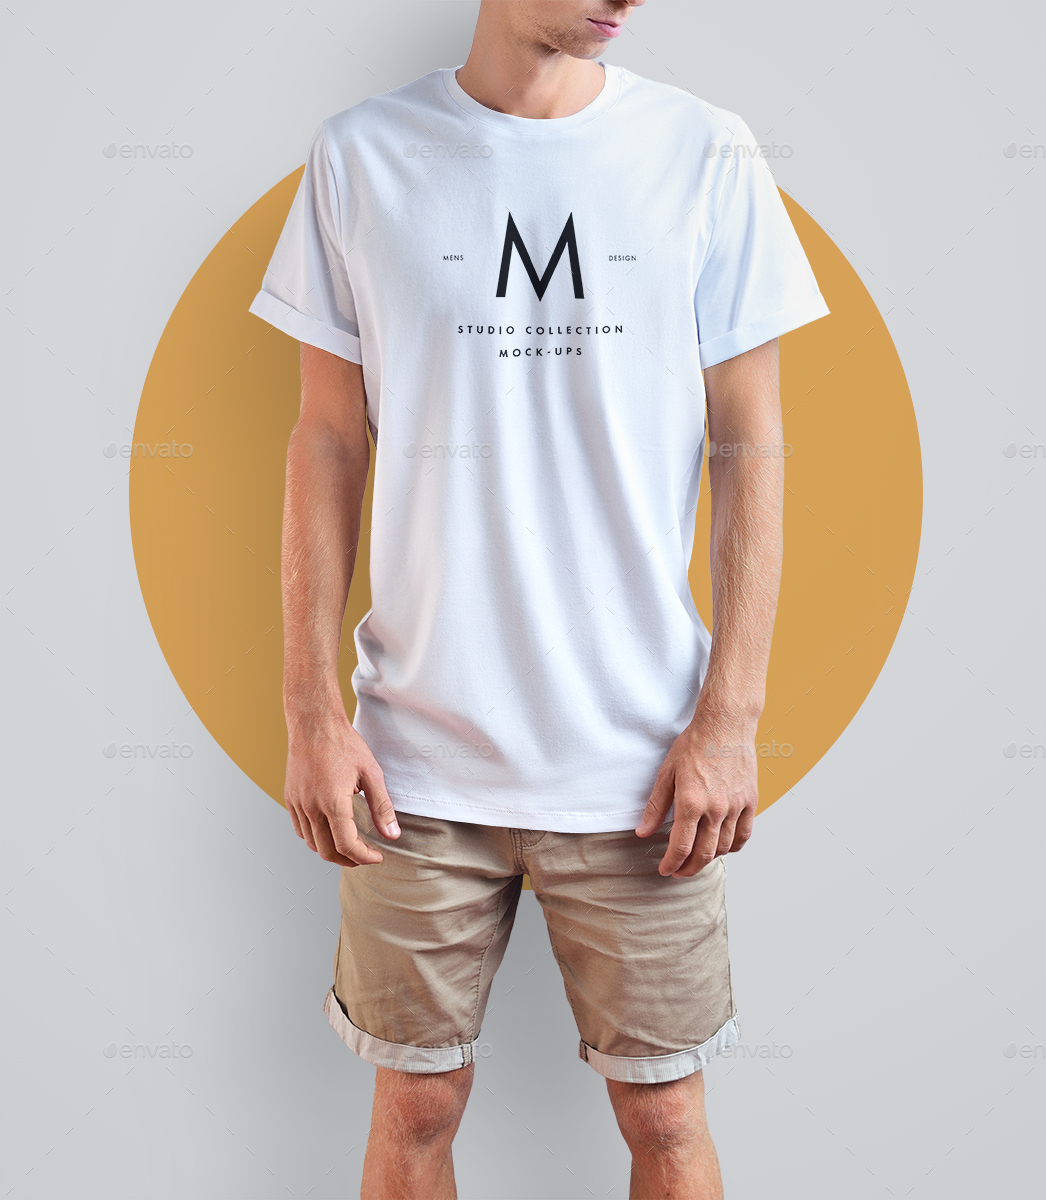 Download 5 Moch-Ups Long T-Shirts + 2 Mock-Ups Packing Boxes by ...